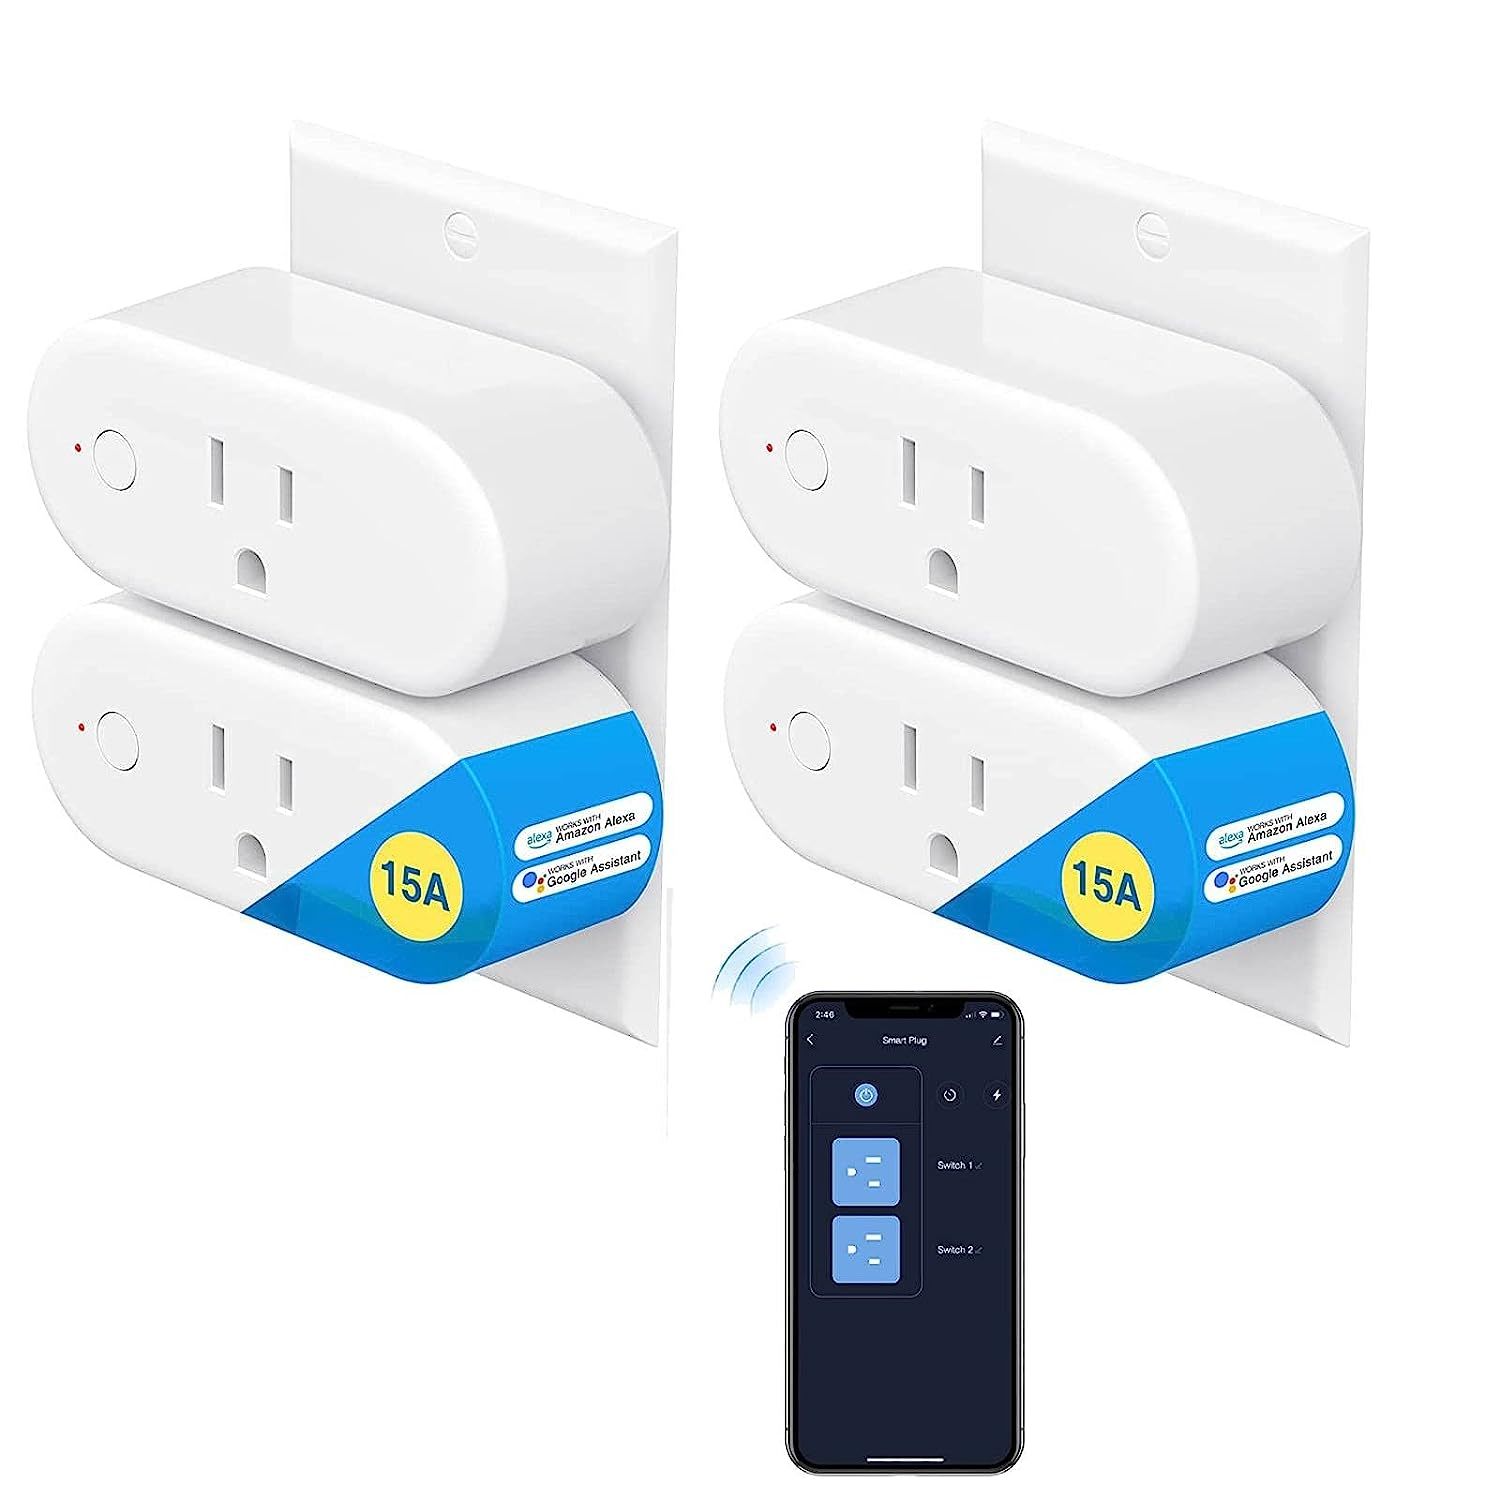 Minoston Outdoor Smart Plug WiFi Outlet Heavy Duty Plug-in Outlet, Remote  Control, Waterproof, Compatible with Alexa Google Assistant, No Hub